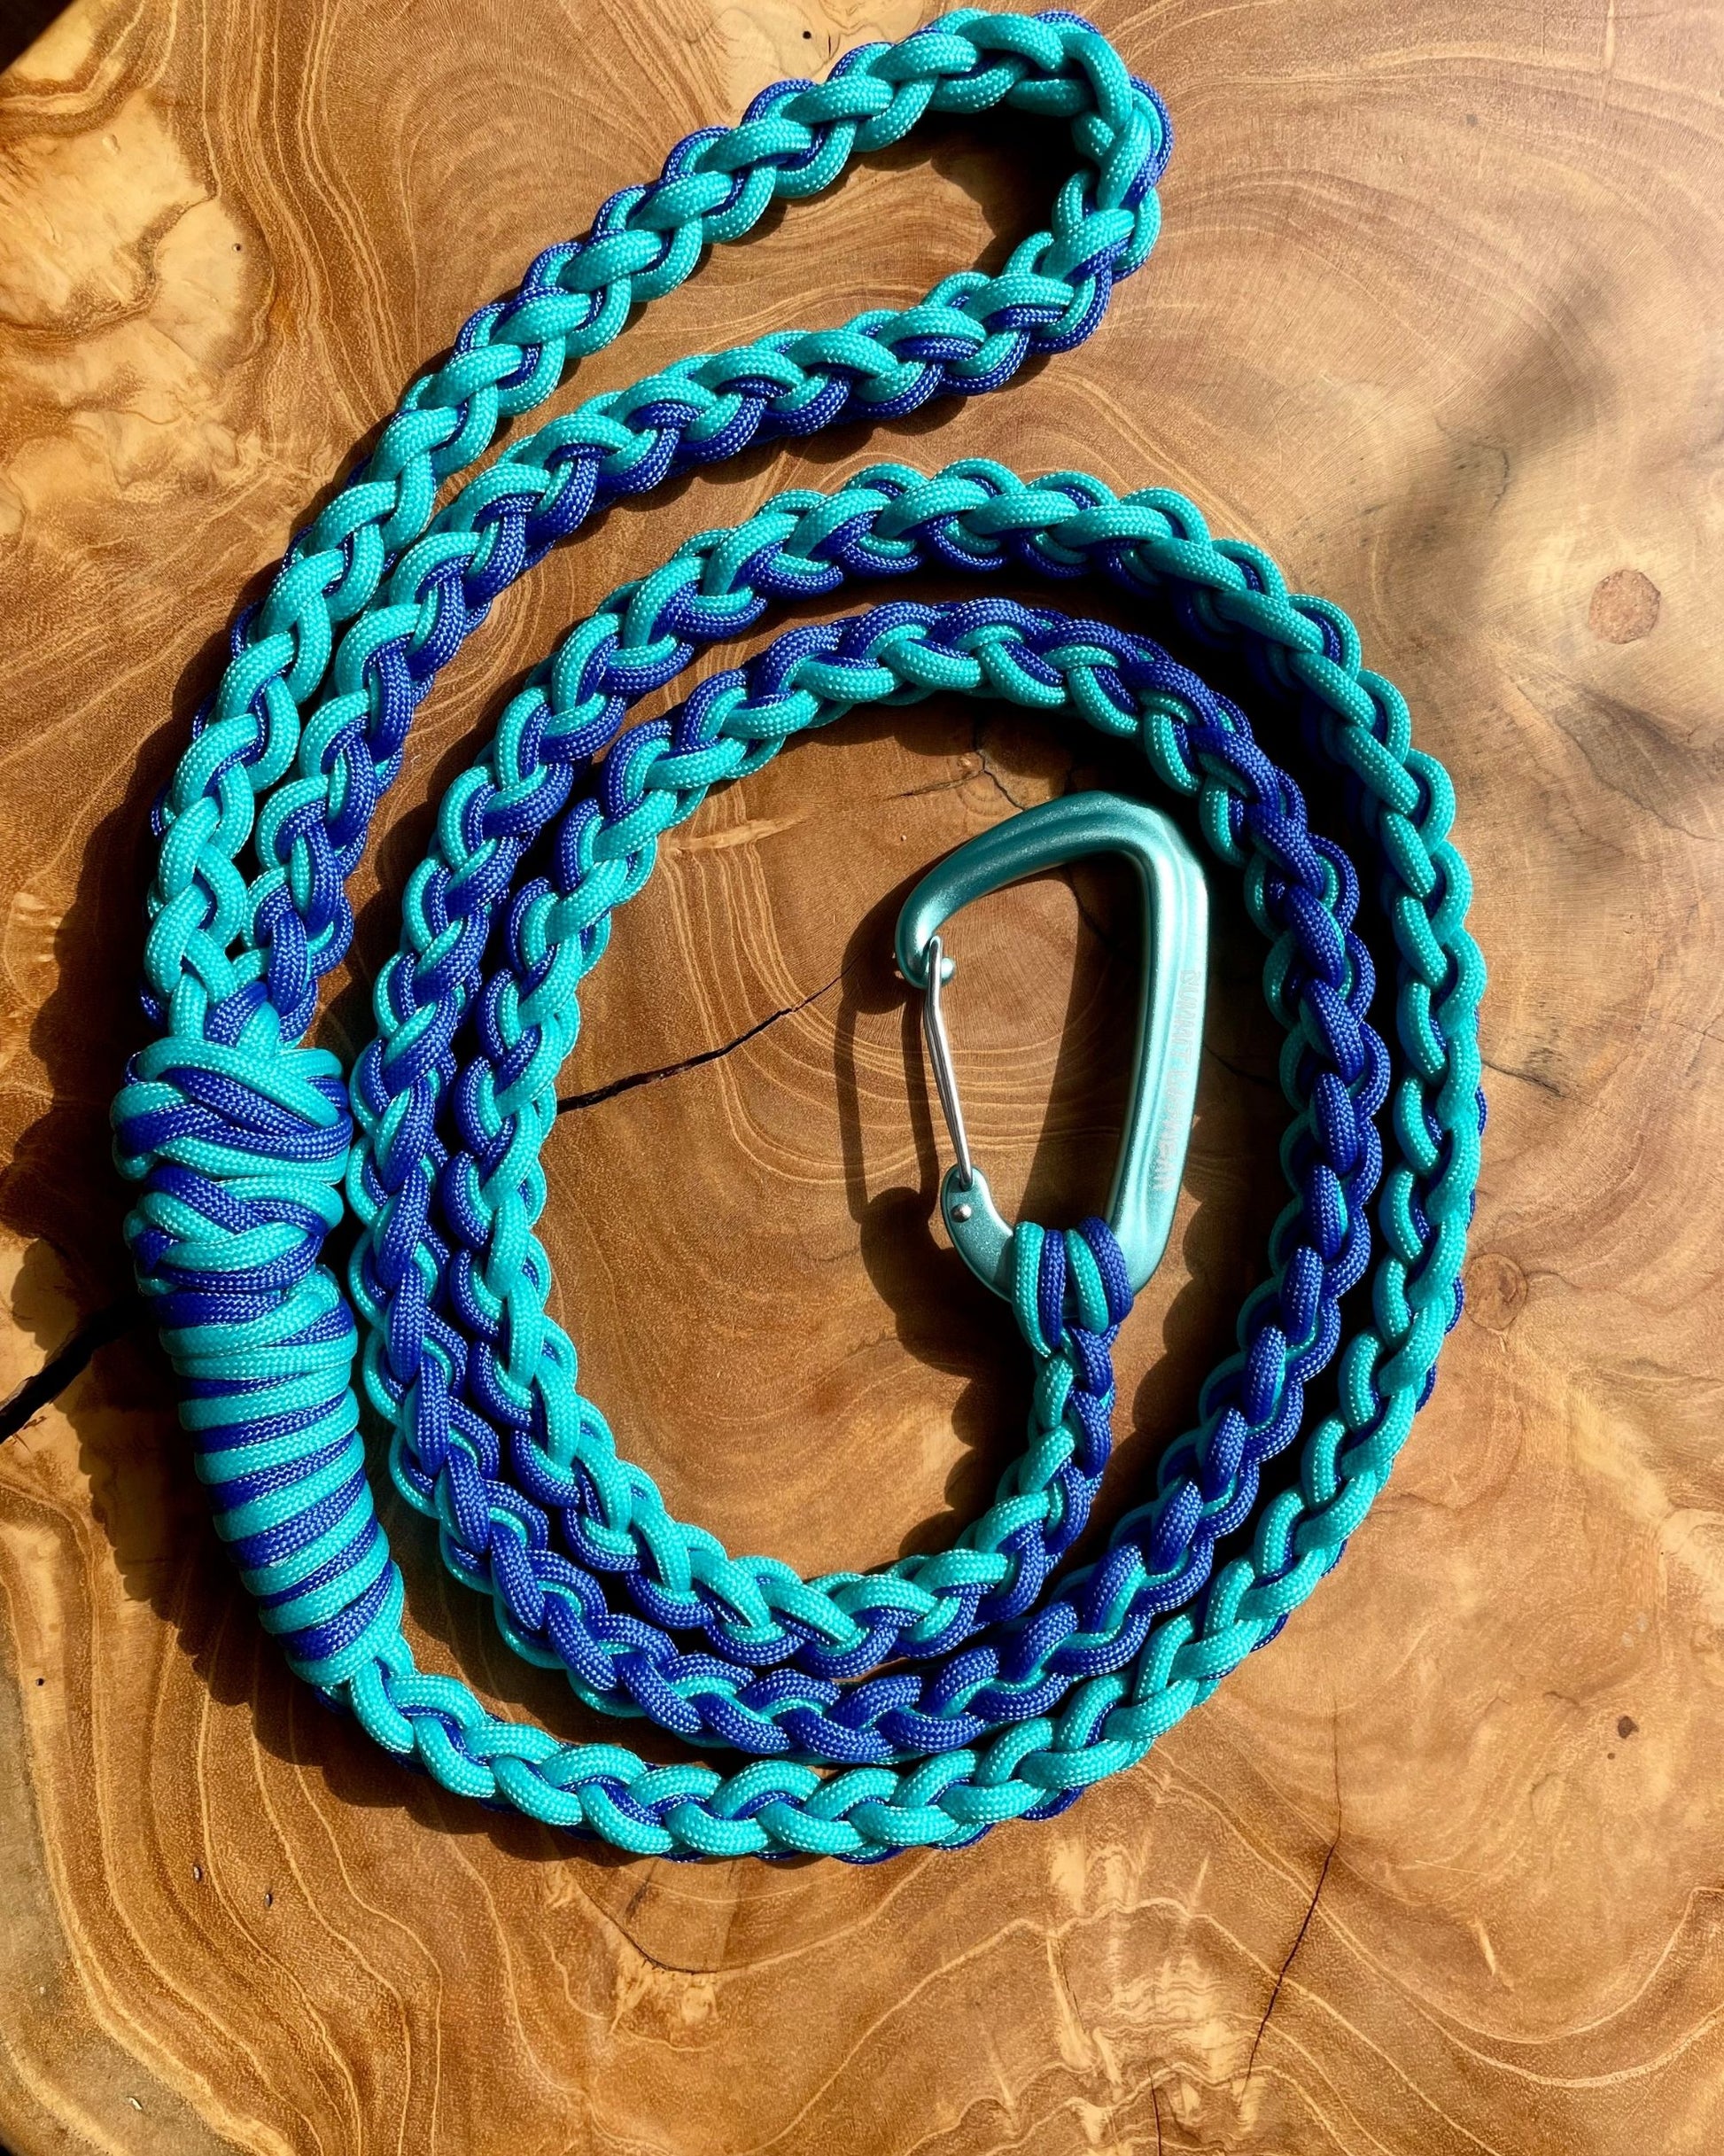 Coiled Bobby leash with blue and teal paracord and a teal carabiner clip. Named after Cascade Falls